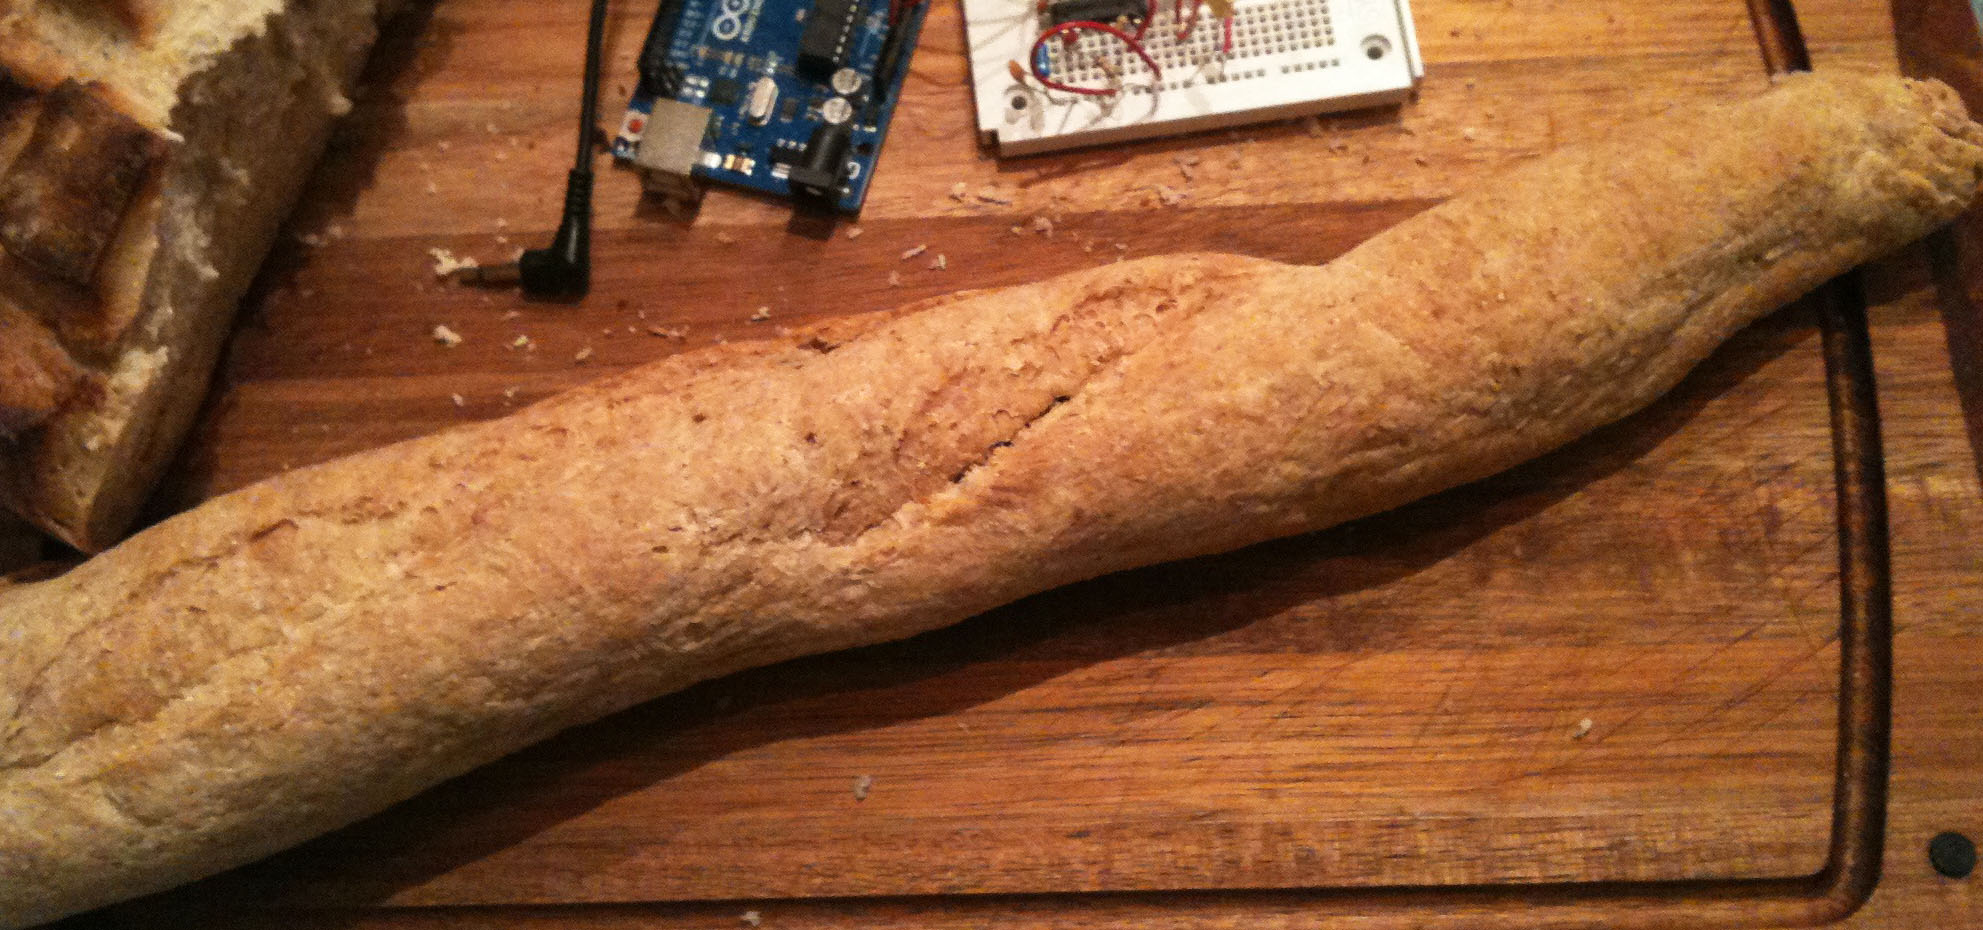 Theremin Baguette Brings New Meaning To Breadboarding